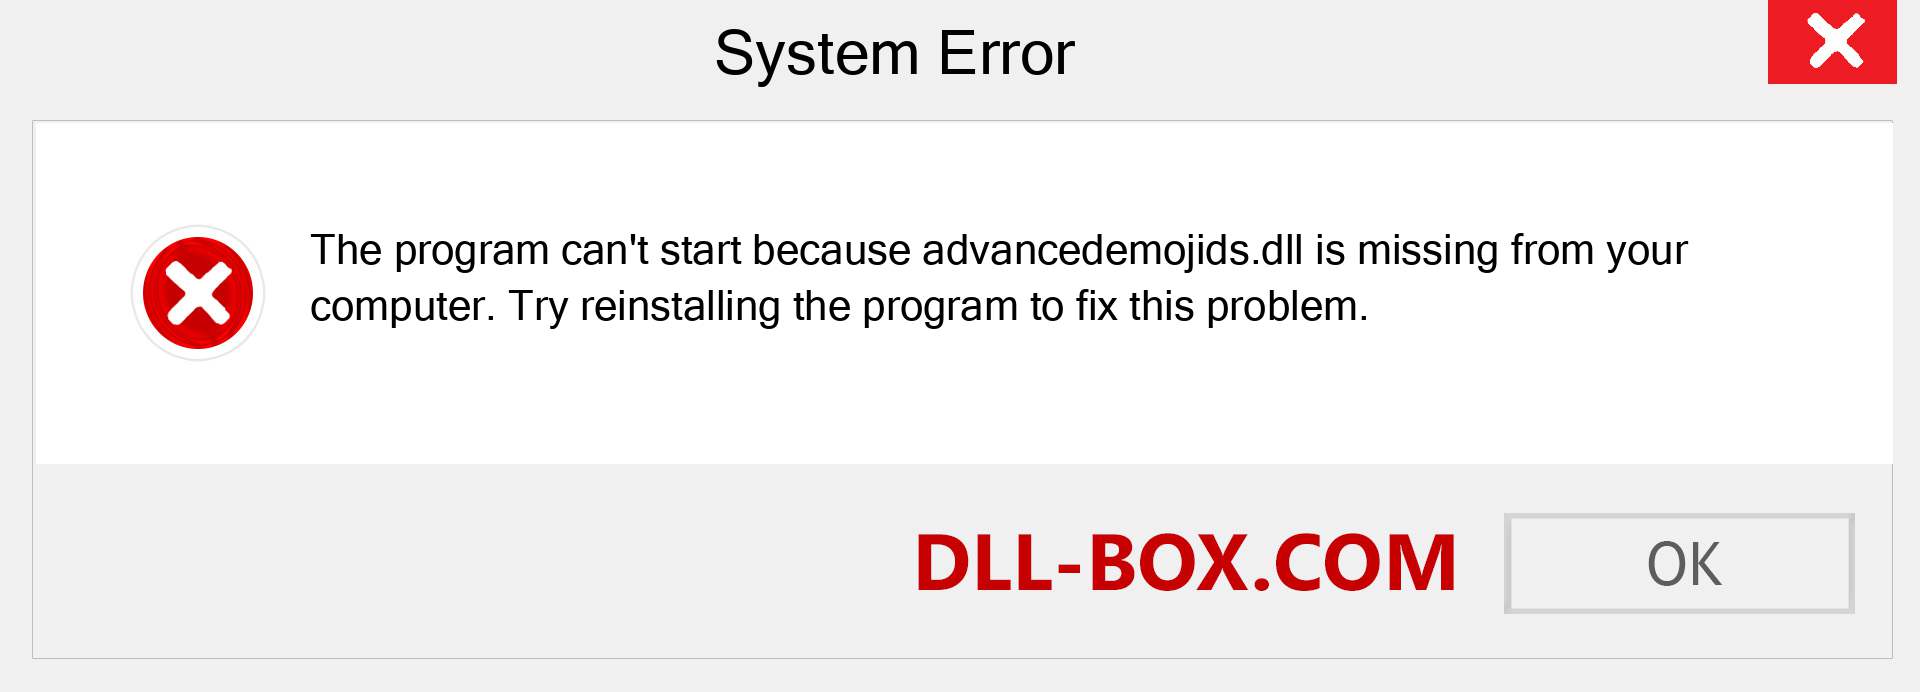  advancedemojids.dll file is missing?. Download for Windows 7, 8, 10 - Fix  advancedemojids dll Missing Error on Windows, photos, images